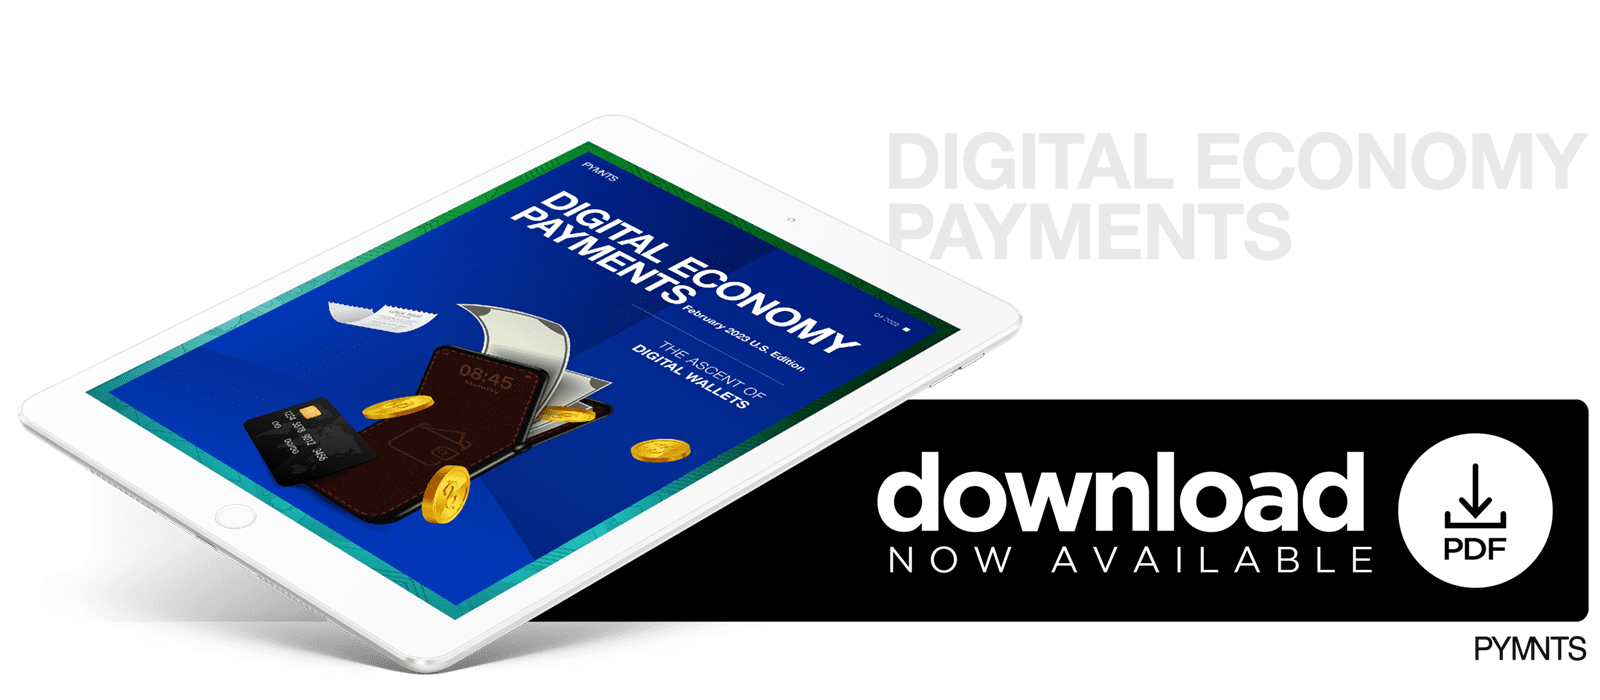 PYMNTS - Digital Economy Payments: The Ascent of Digital Wallets - February 2023 - Discover how digital wallets continue to drive growth in eCommerce retail sales